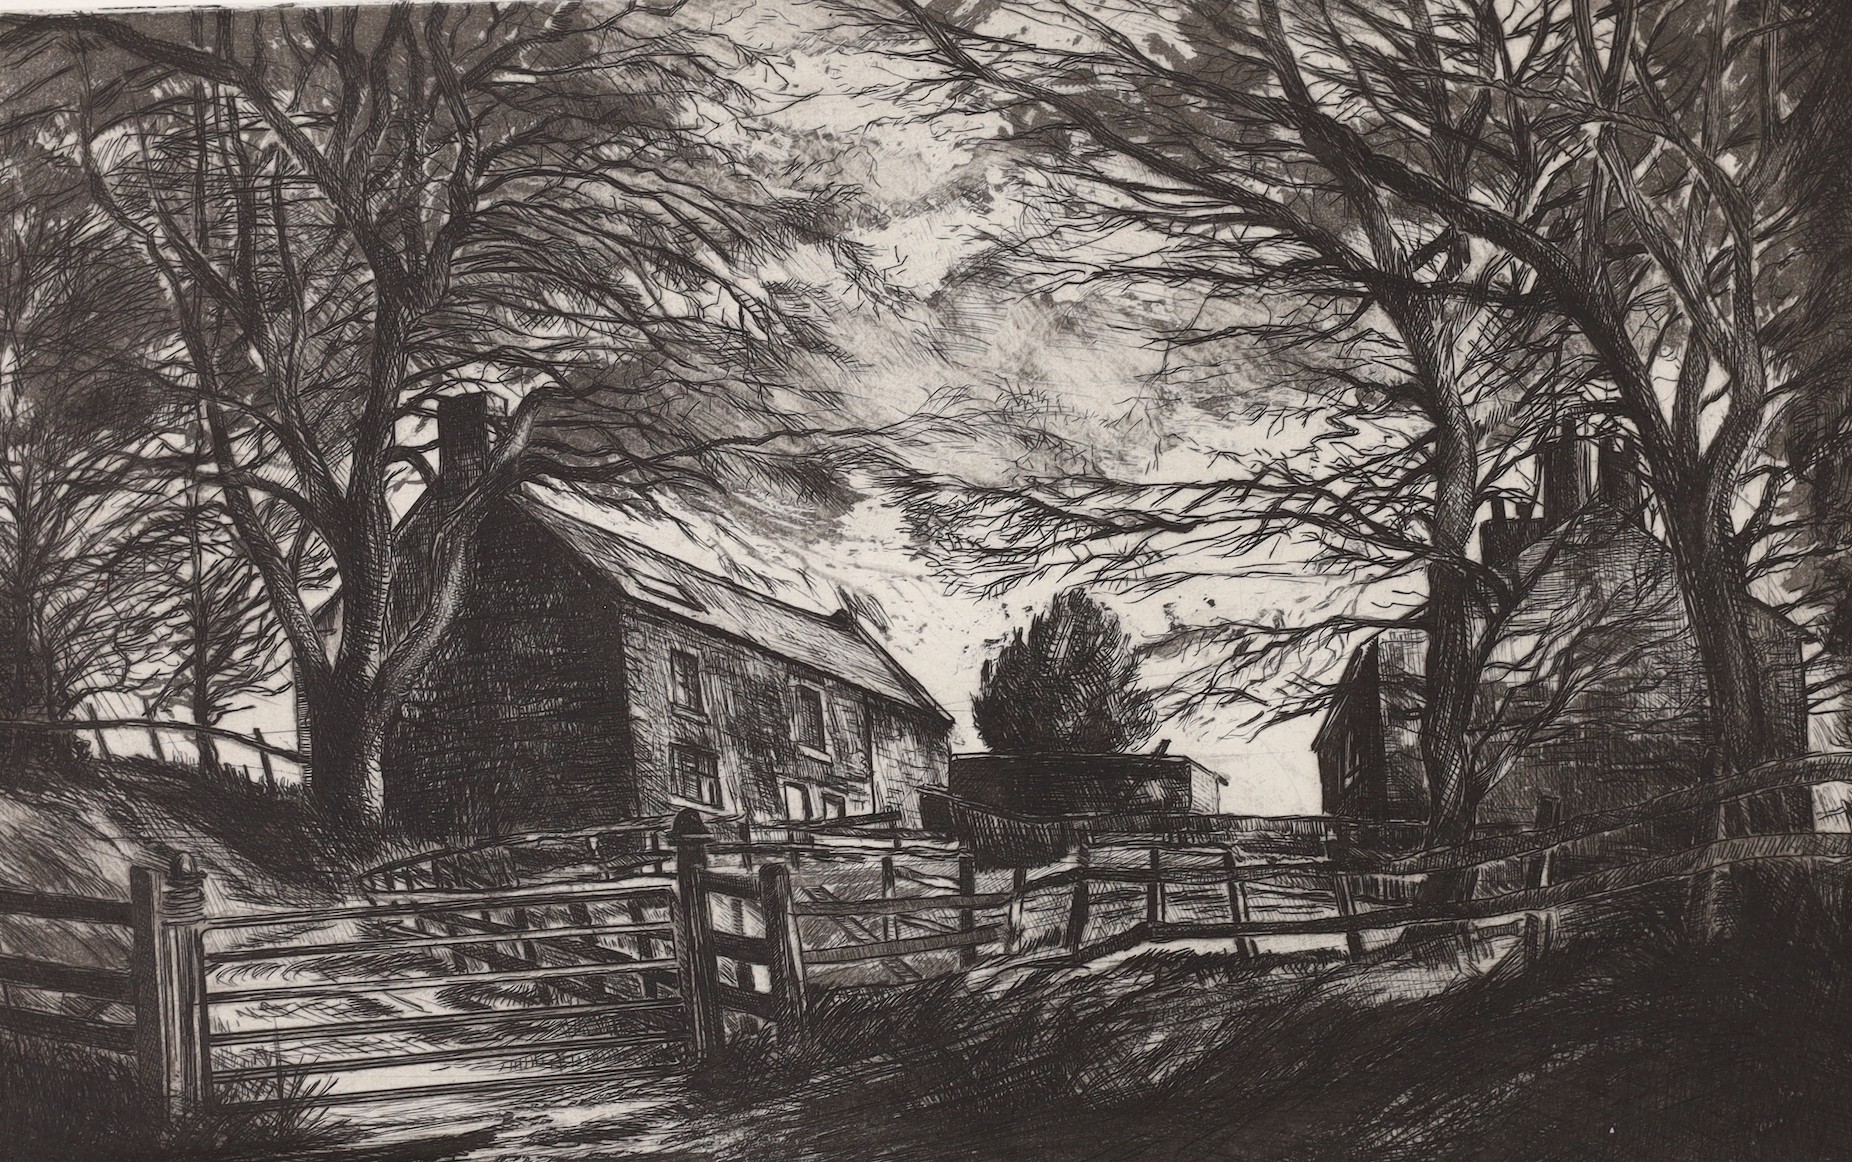 David Carr (1944-2009), three etchings, 'Danby, Yorkshire', 'St Paul's and Blackfriars' and 'Christmas Eve, Lythe', signd and inscribed in pencil, largest 25 x 40cm, unframed